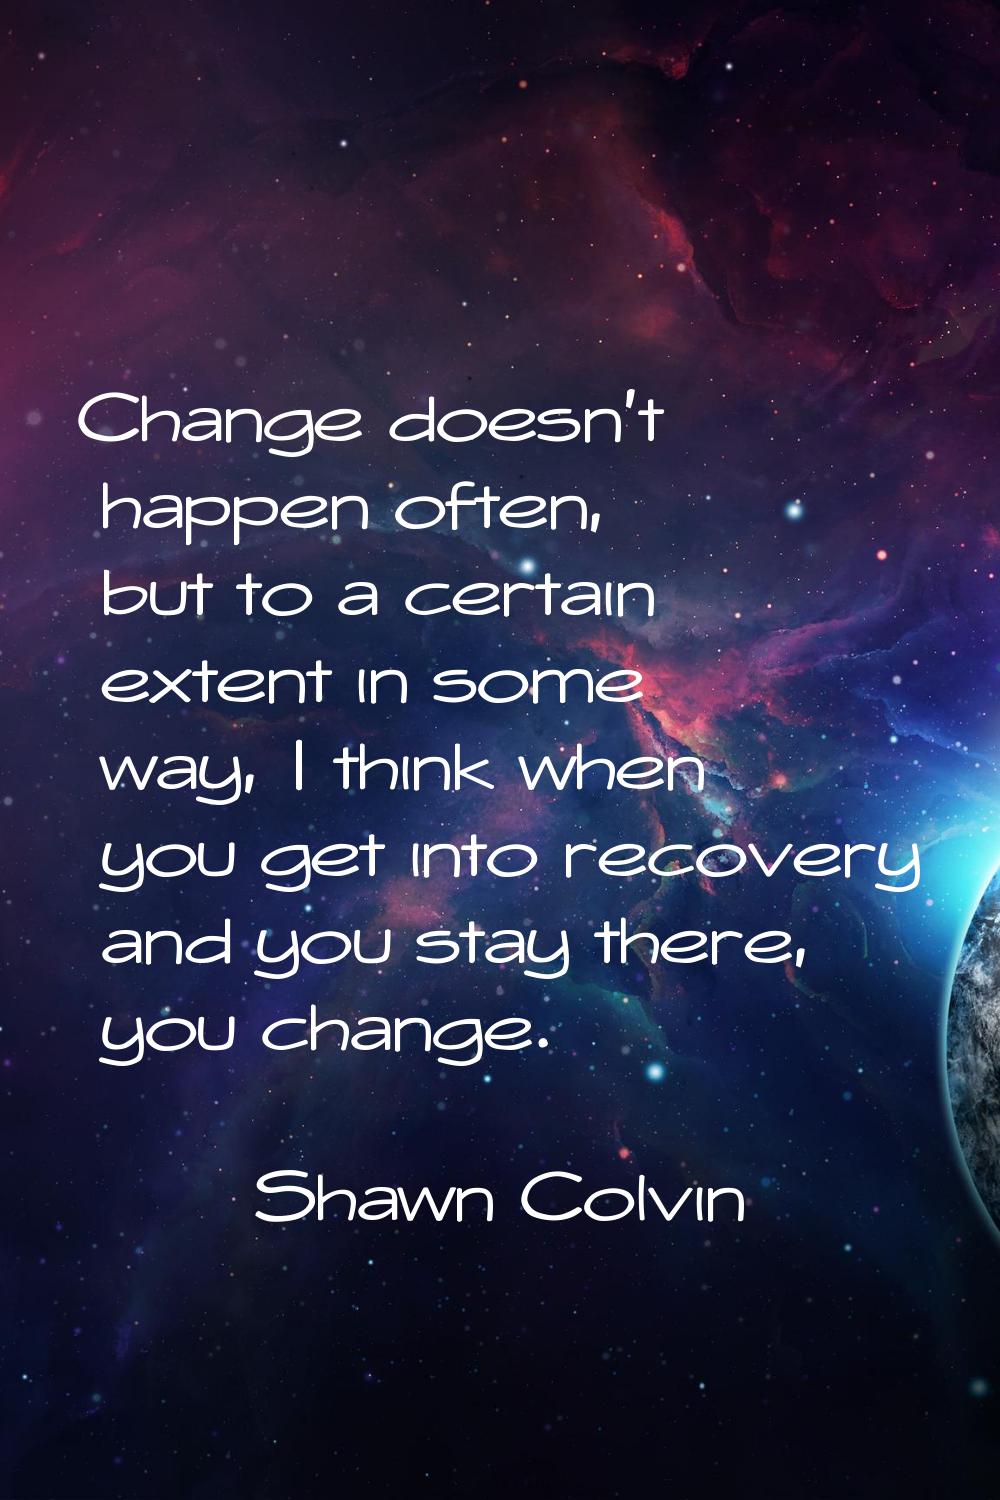 Change doesn't happen often, but to a certain extent in some way, I think when you get into recover